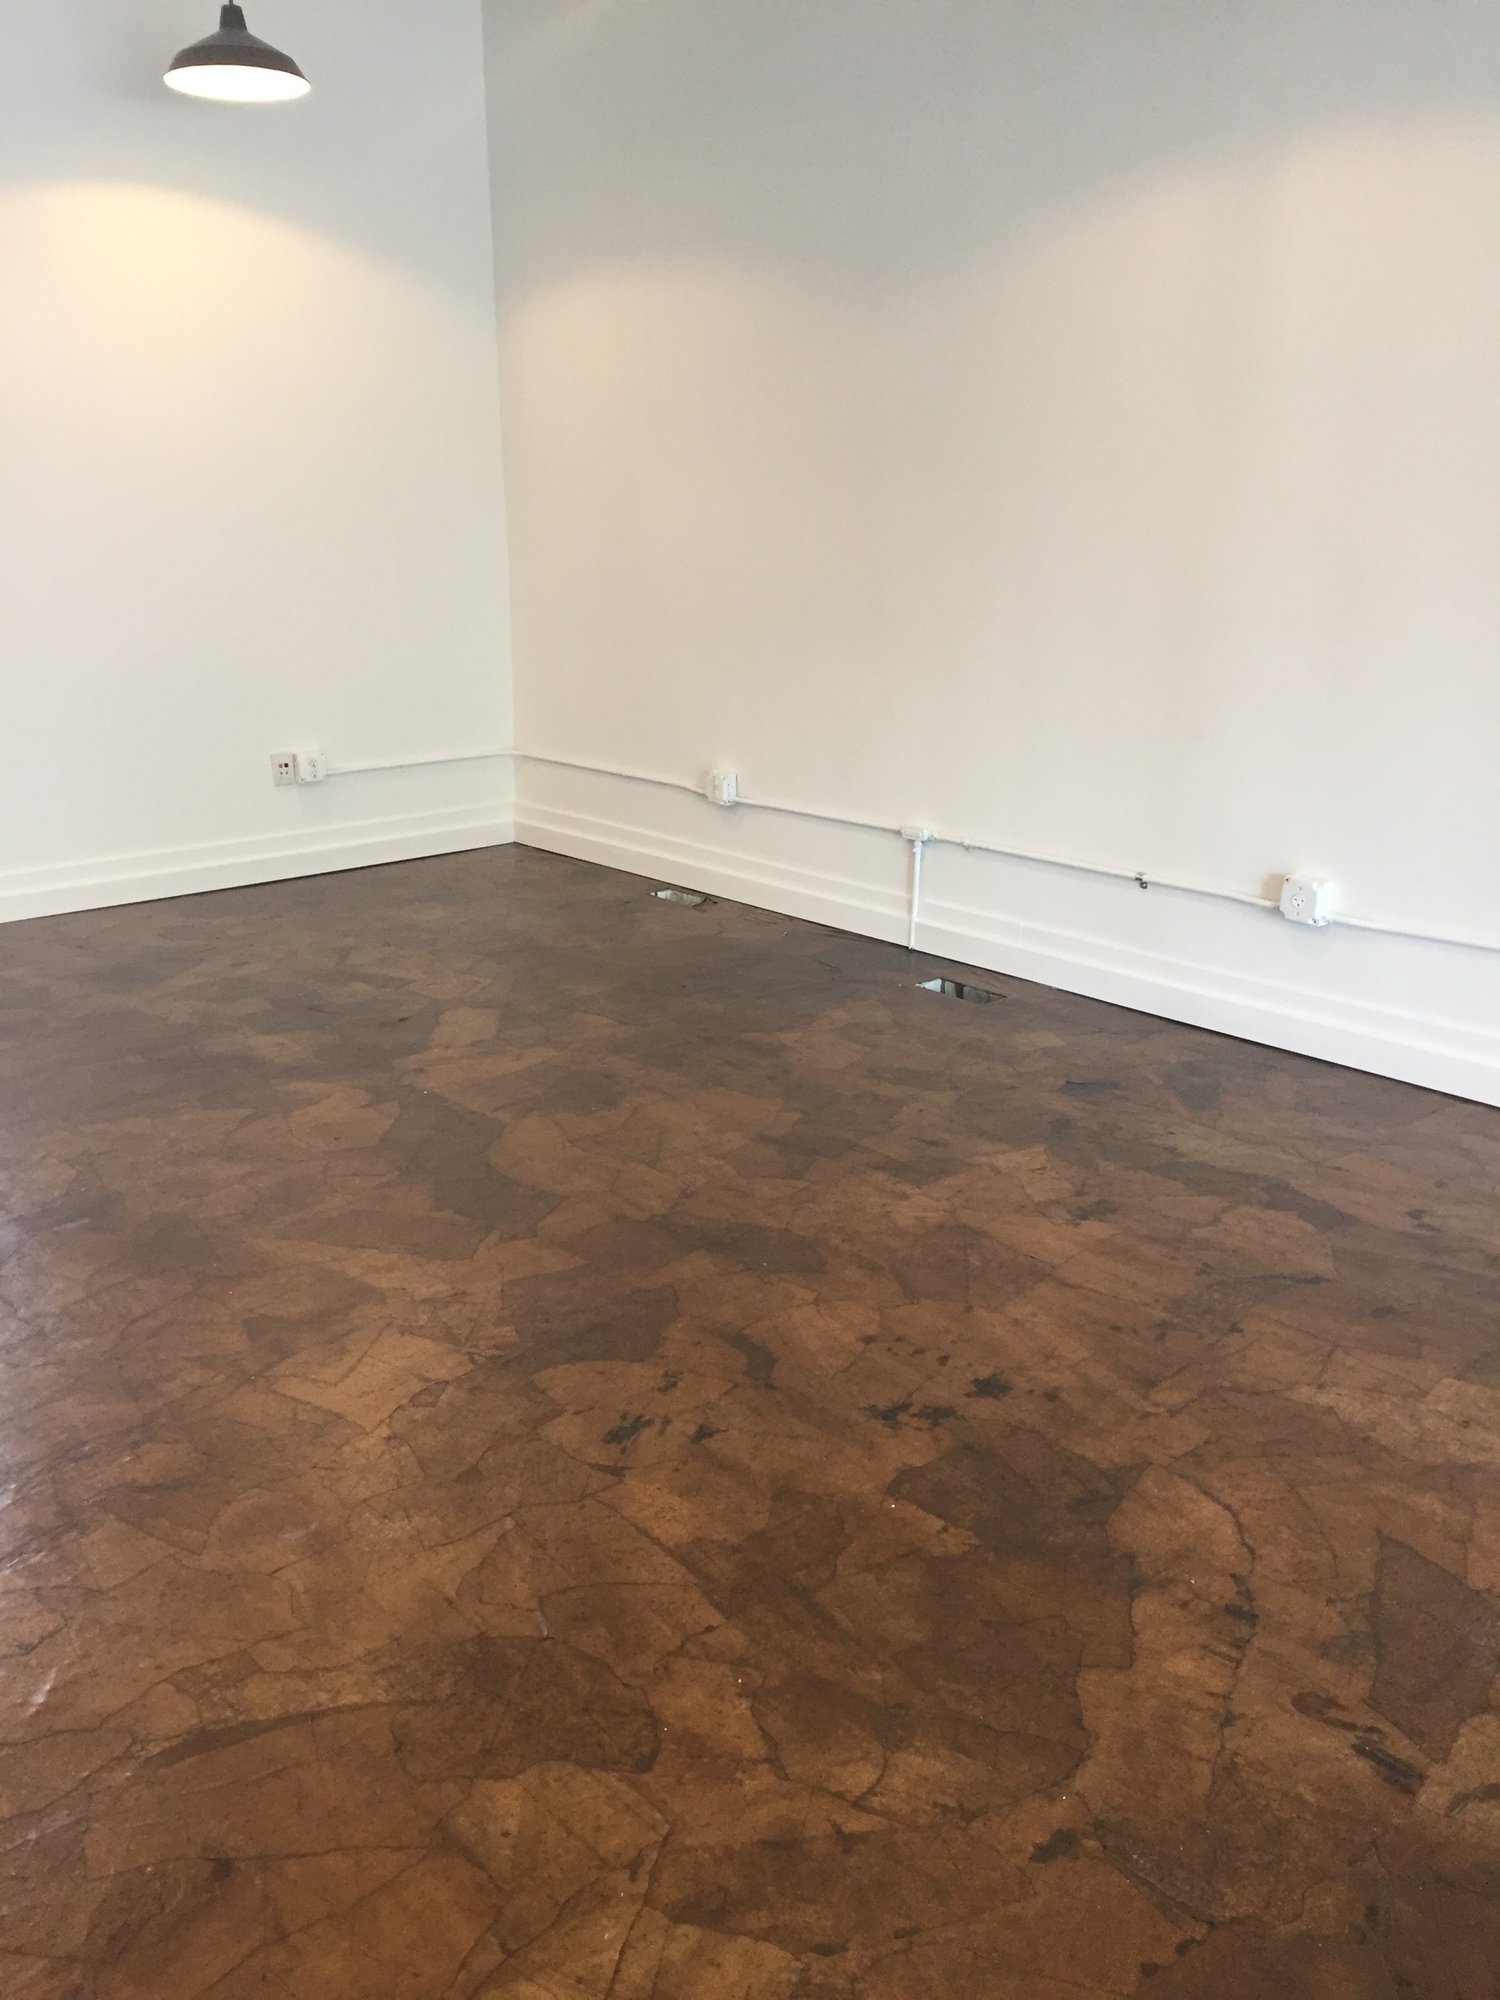 All You Need to Know About Paper Bag Flooring  Paper flooring, Brown paper  flooring, Paper bag flooring